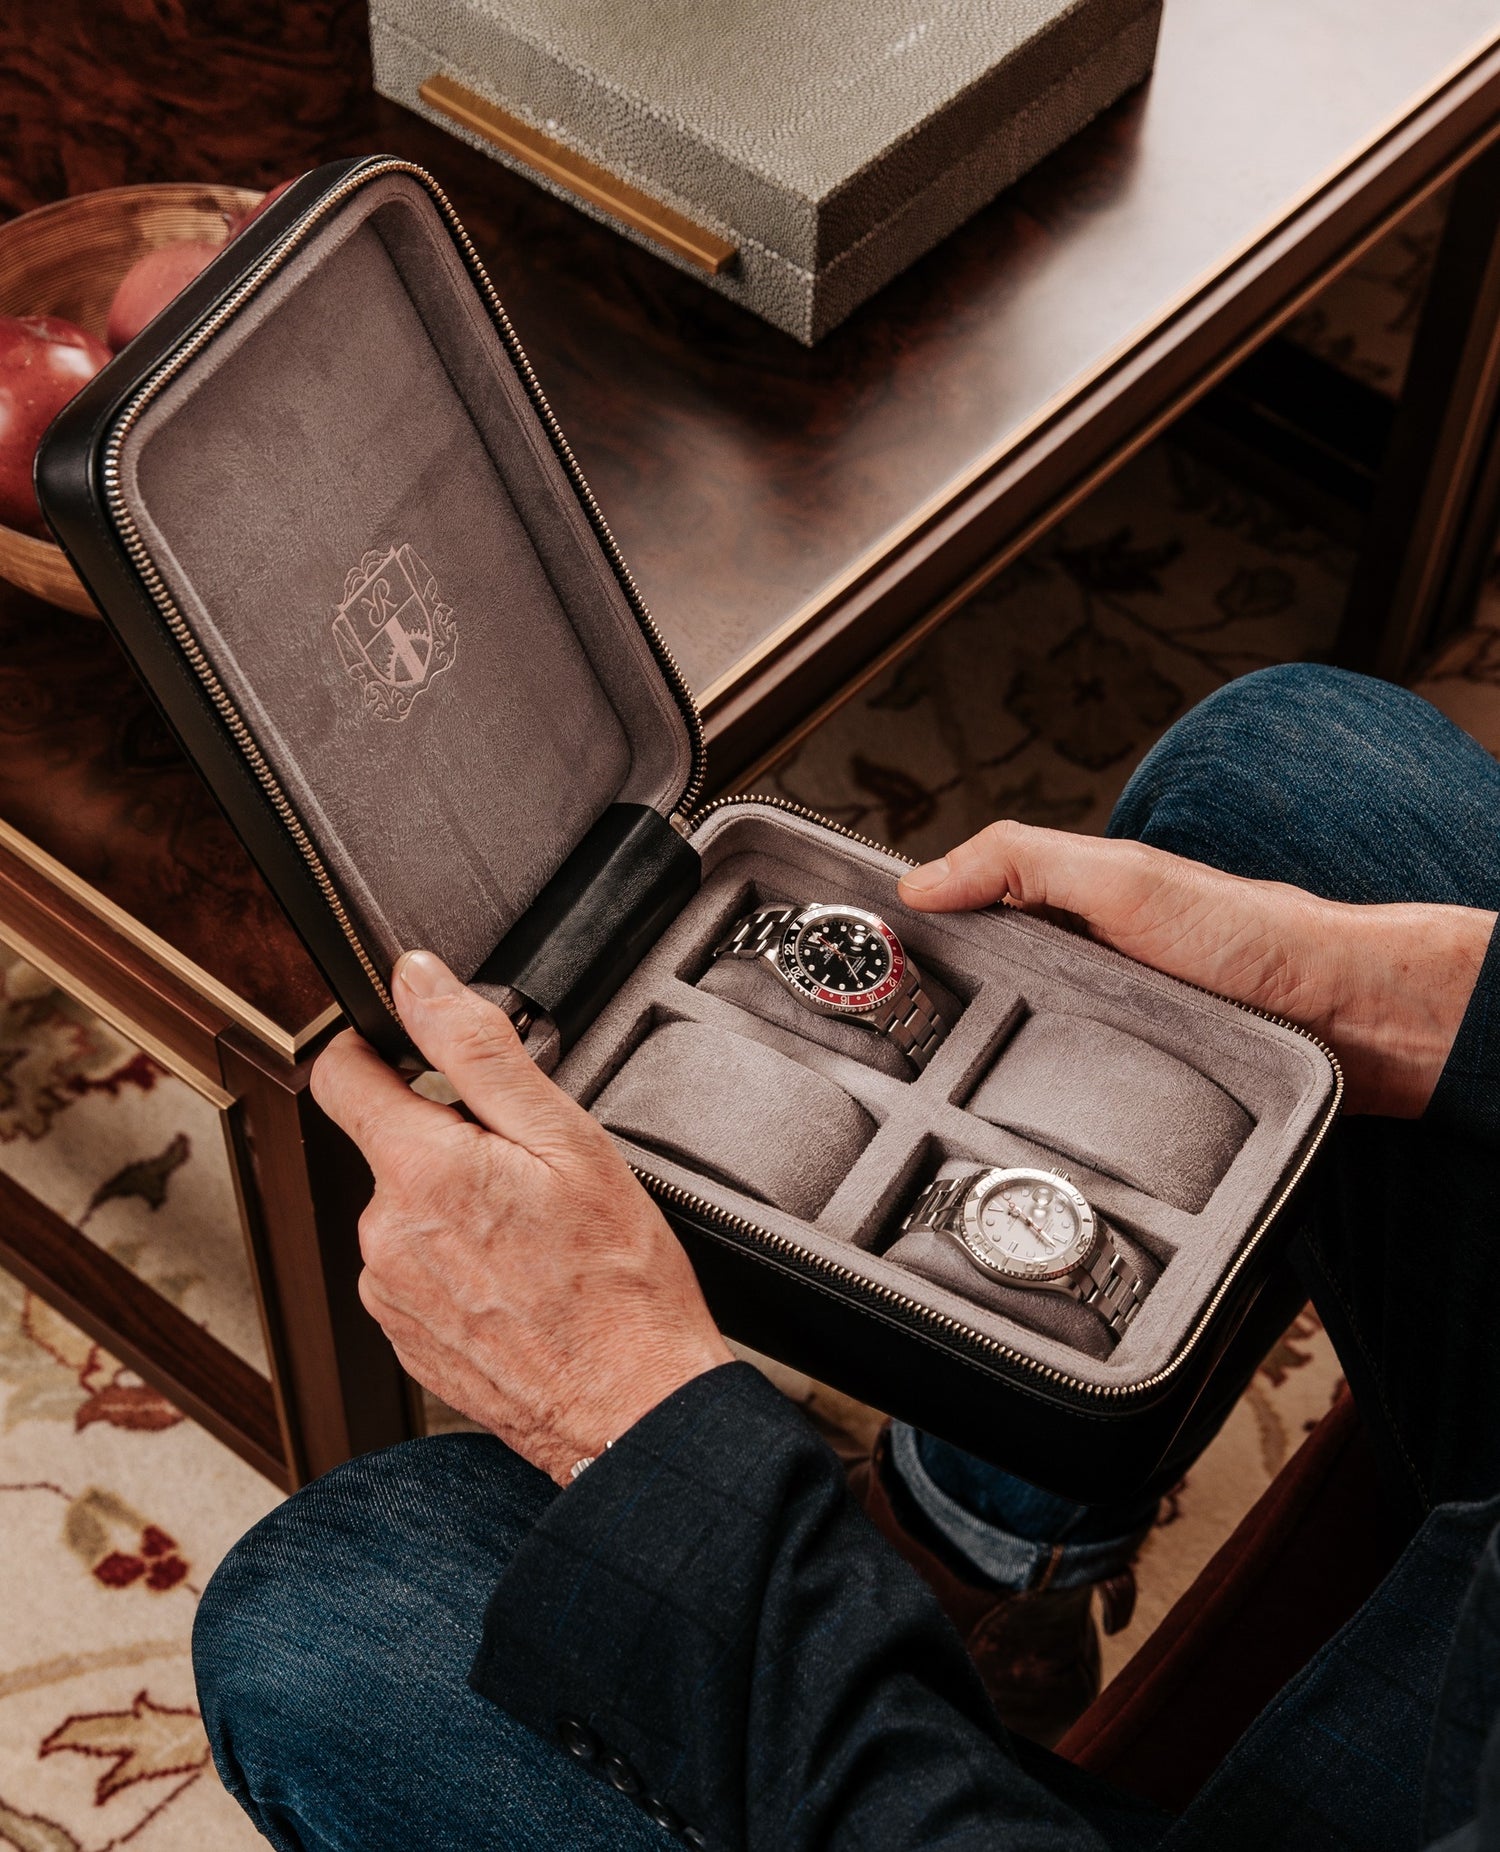 Introducing Rapport London: Luxury Watch Winders And Watch Boxes